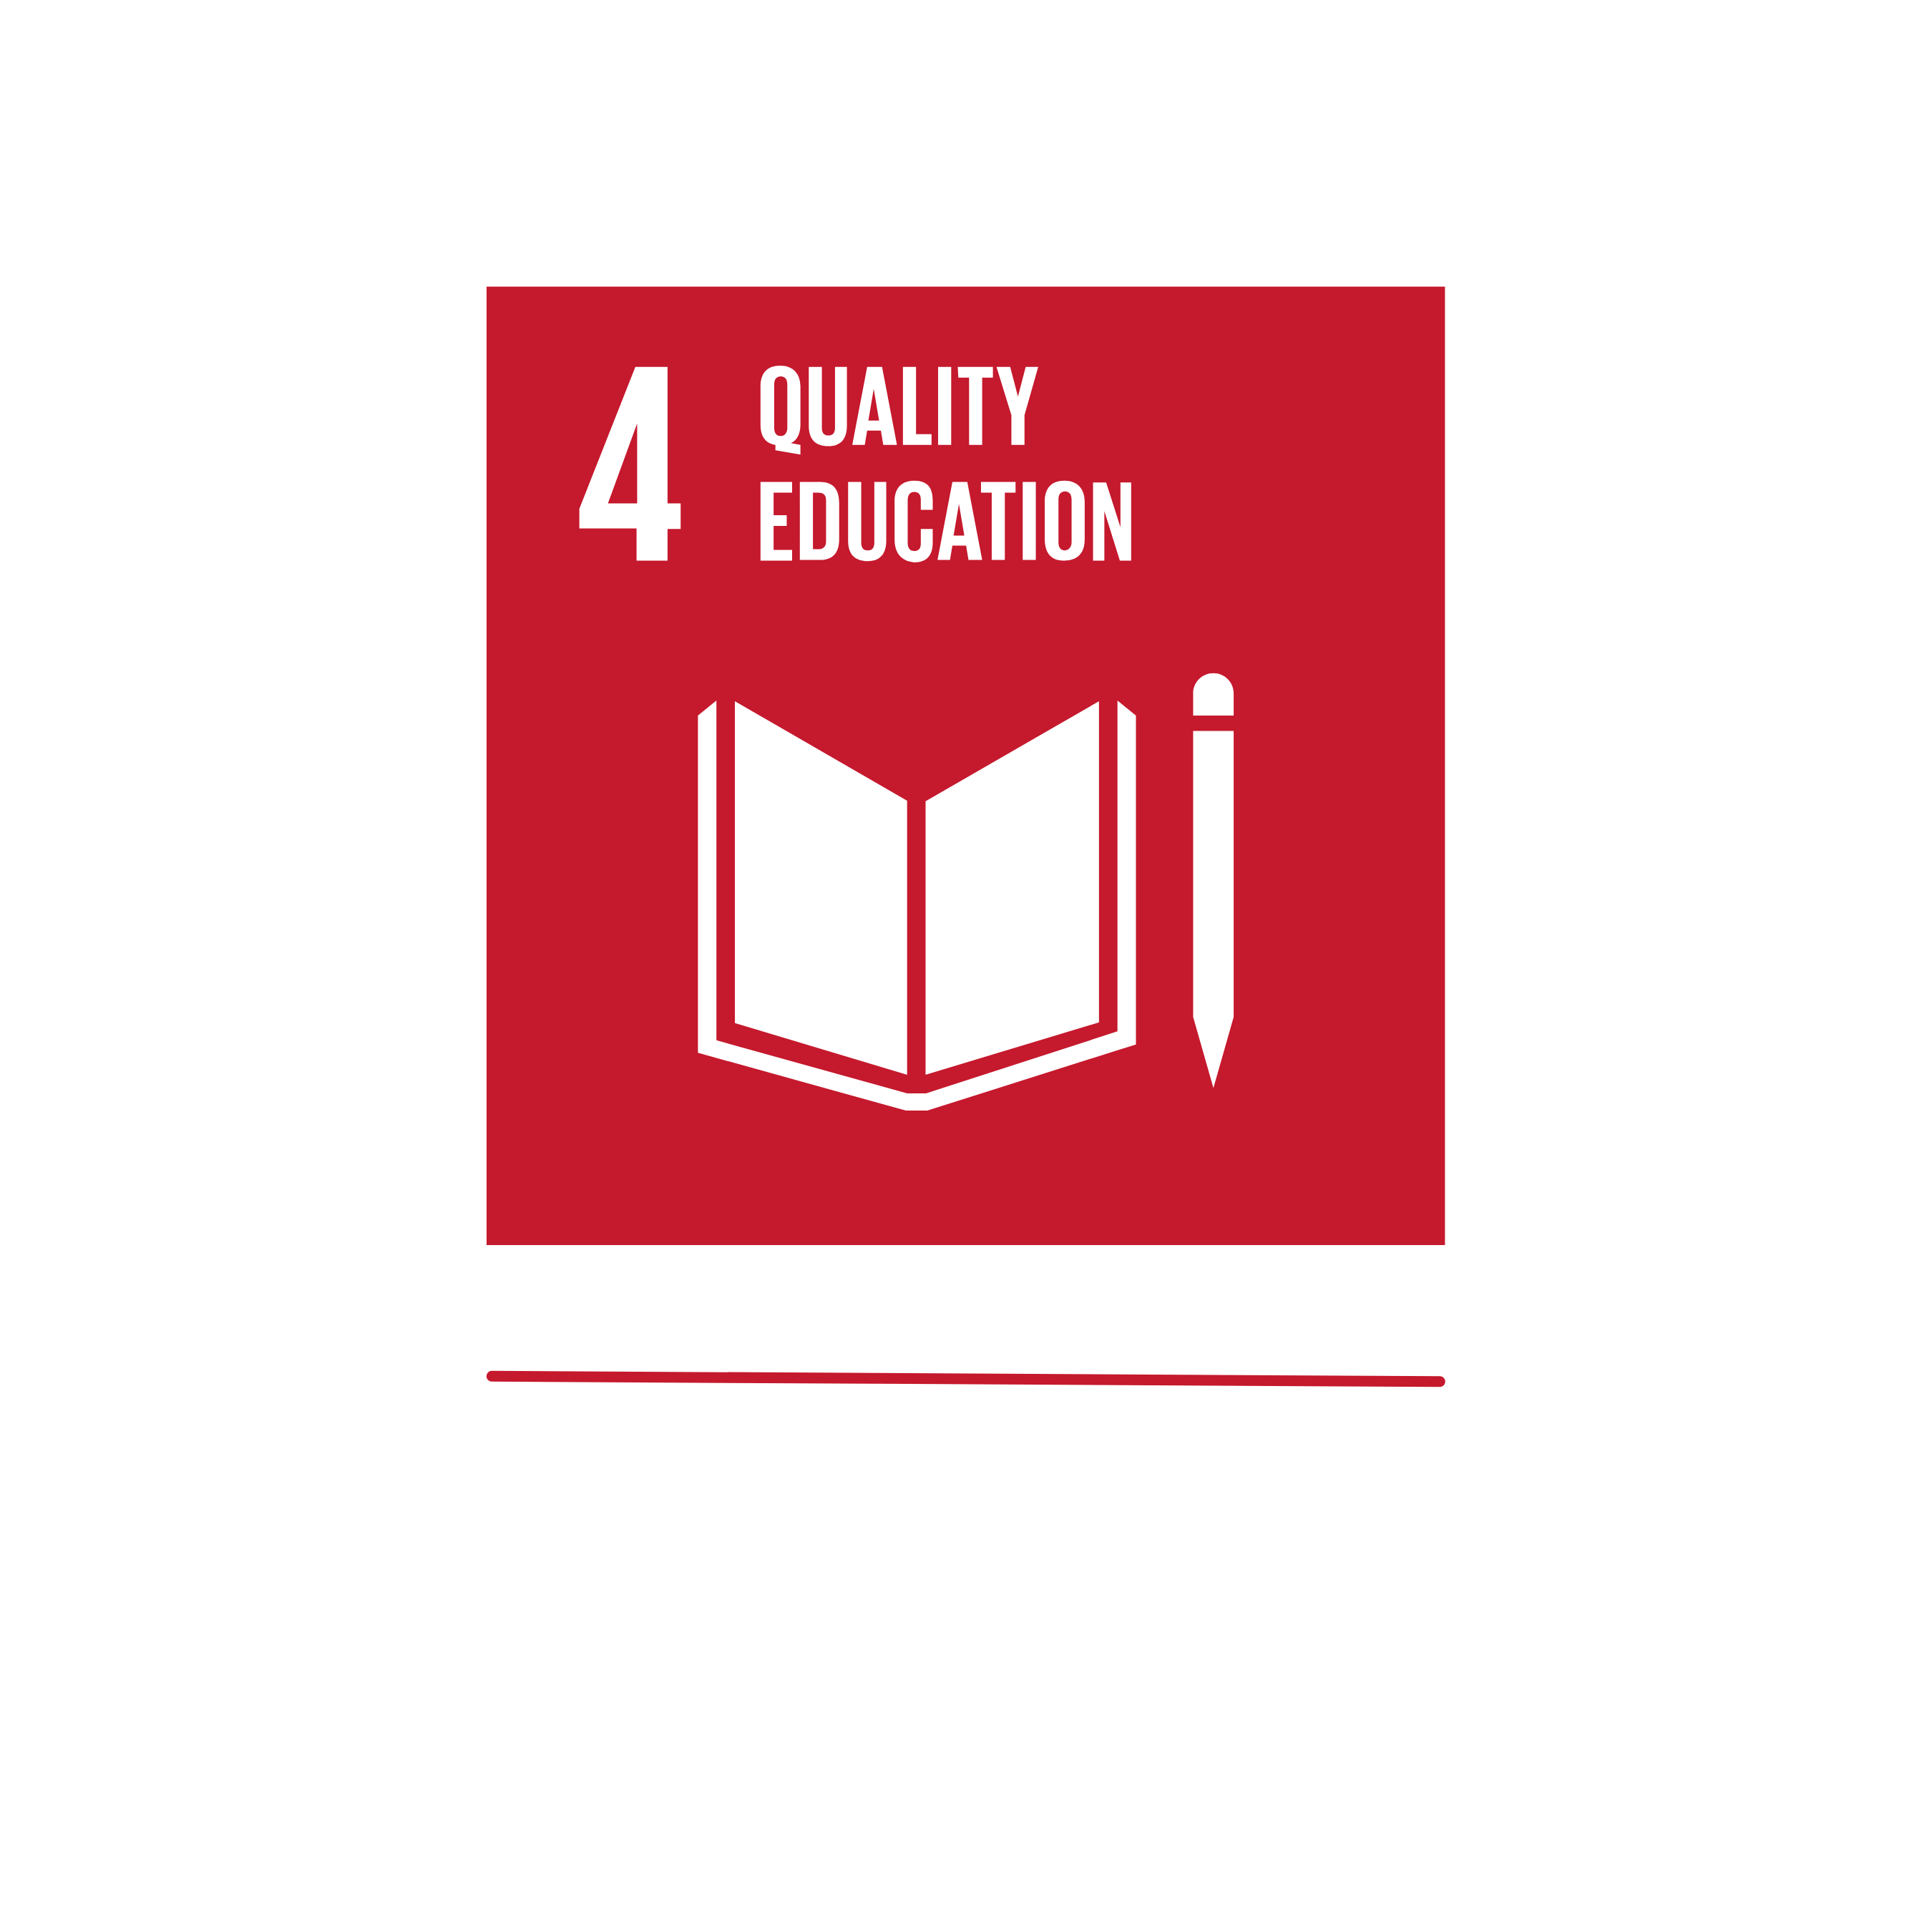 This is a picture of SDG 4, which stands for quality education. SUMM is committed to quality education under SDG 4.